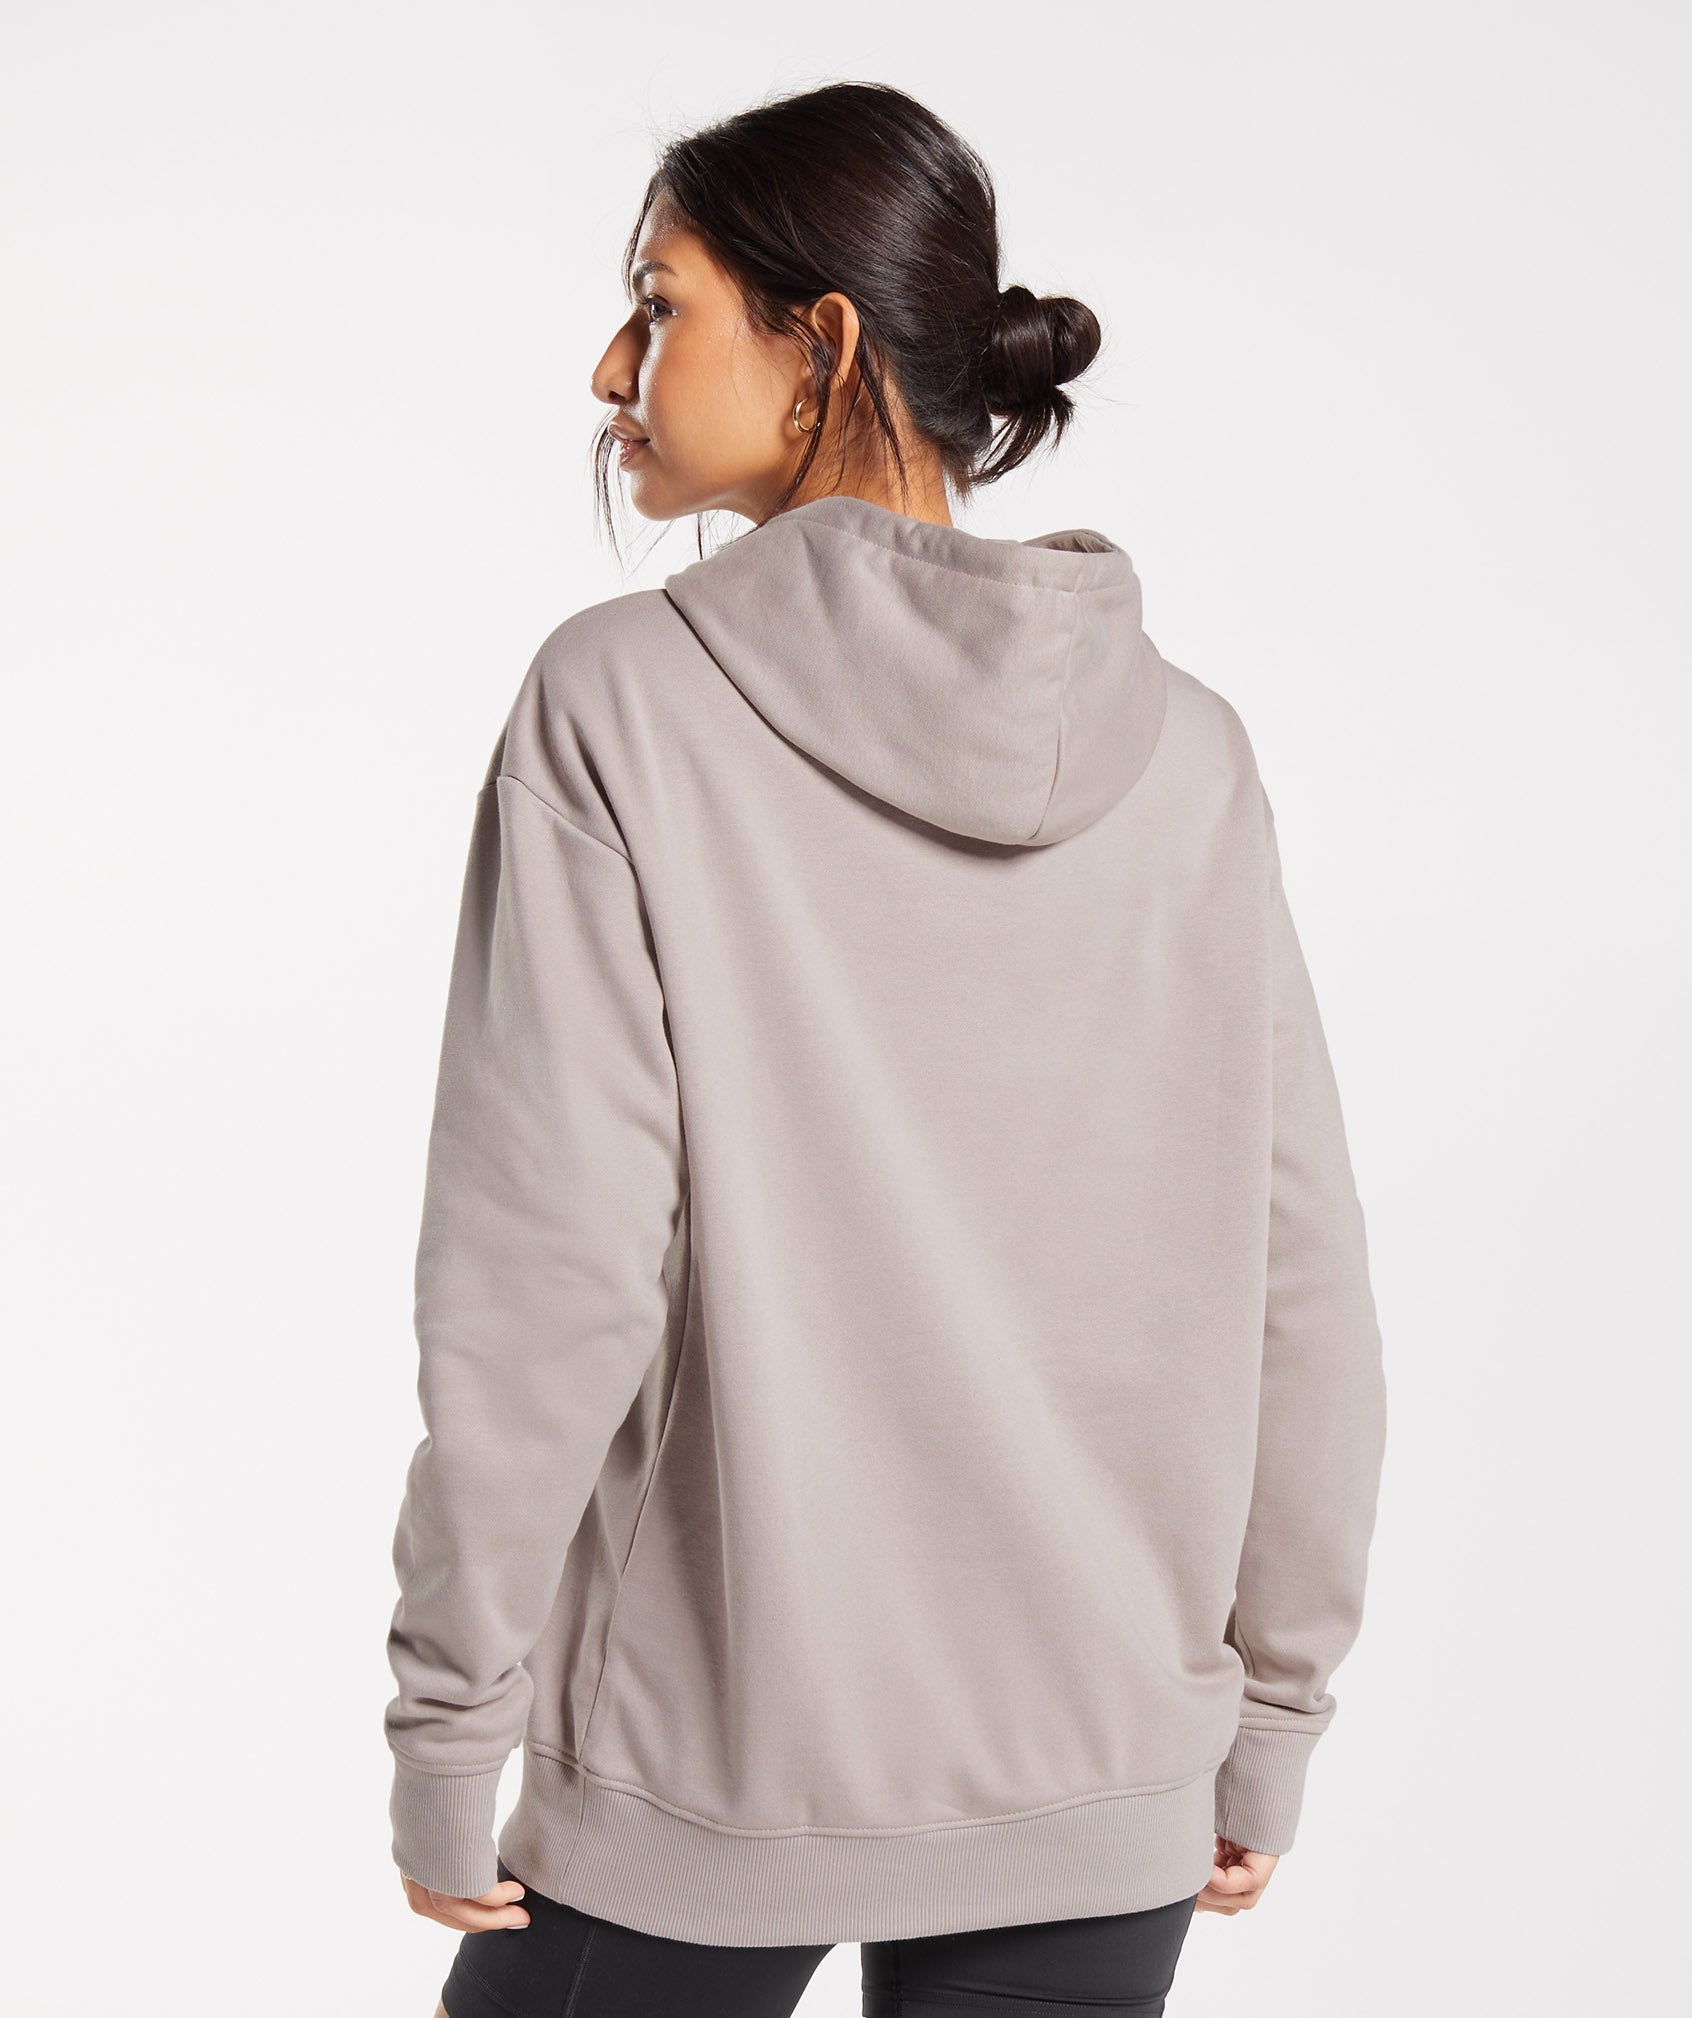 Gymshark Recess Hoodie Pink - $35 (30% Off Retail) New With Tags